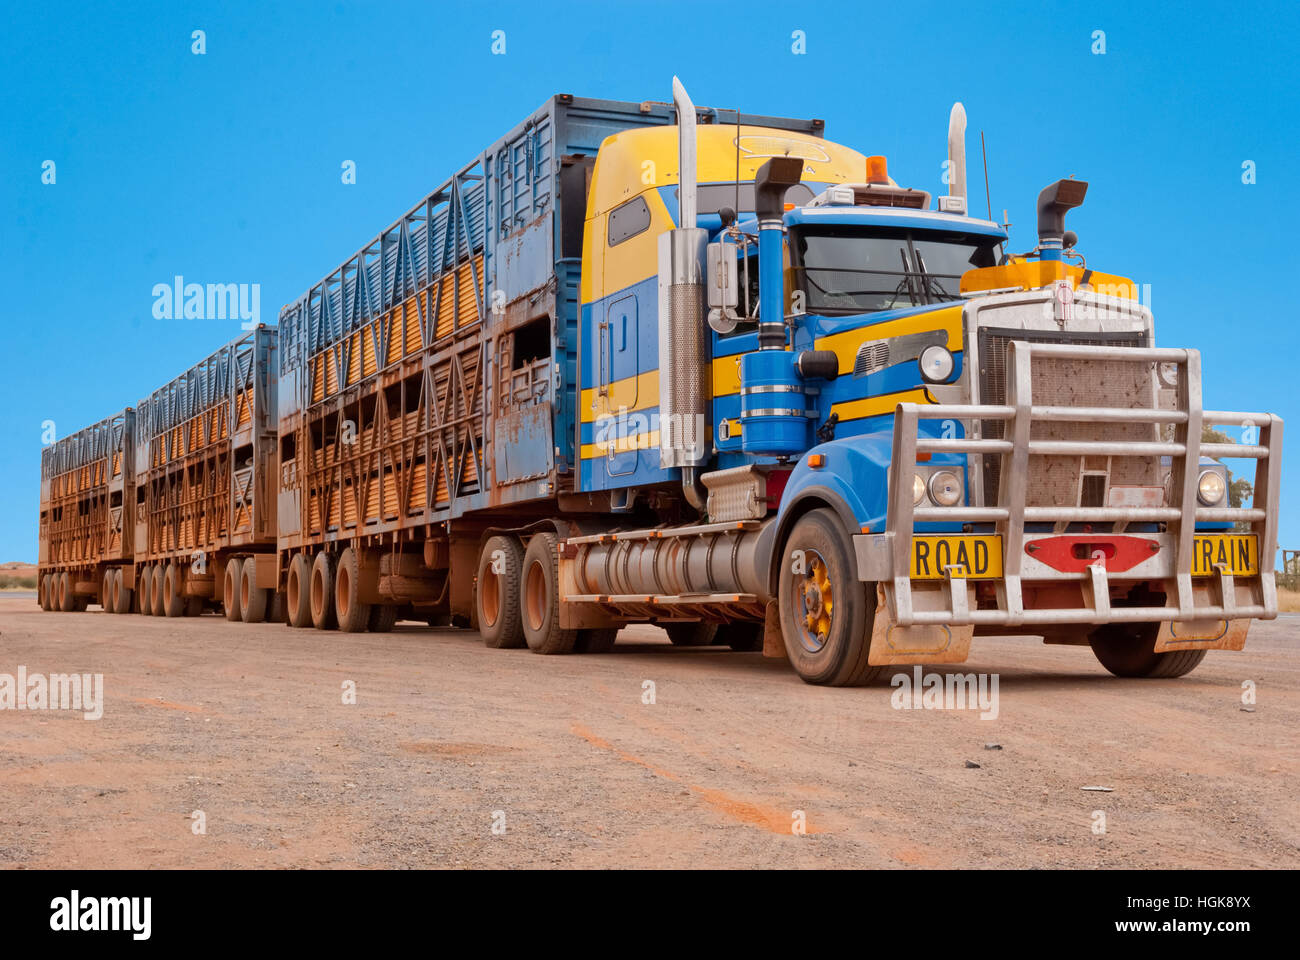 Road train in the Australian outback Stock Photo